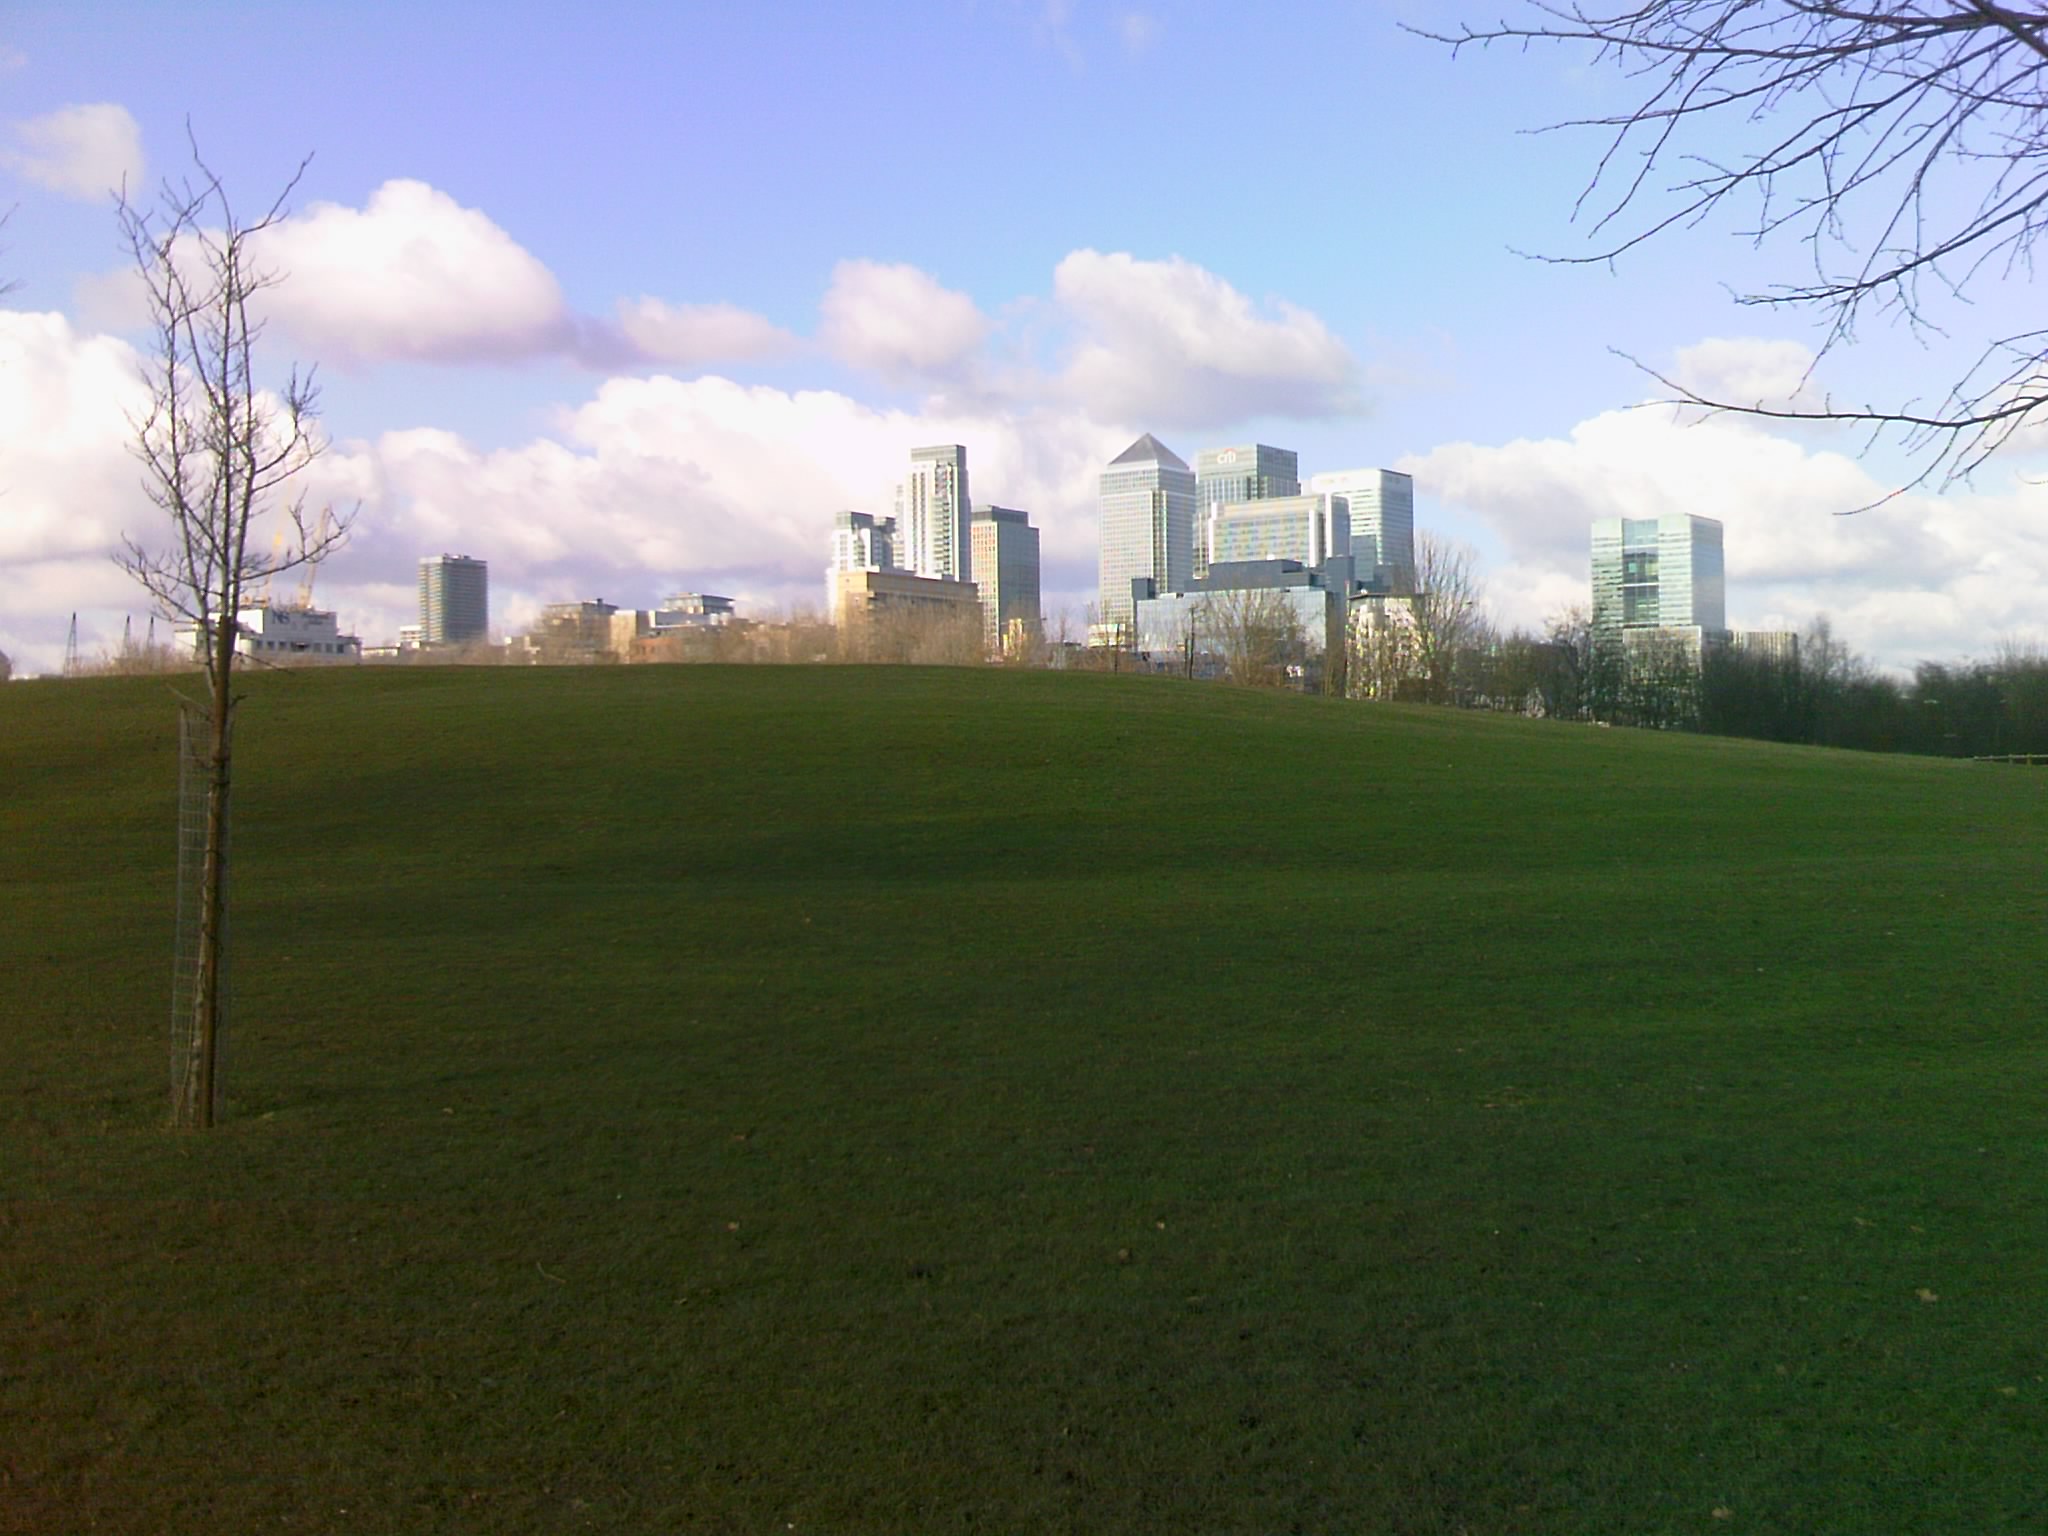 a very green field with some very tall buildings in the background